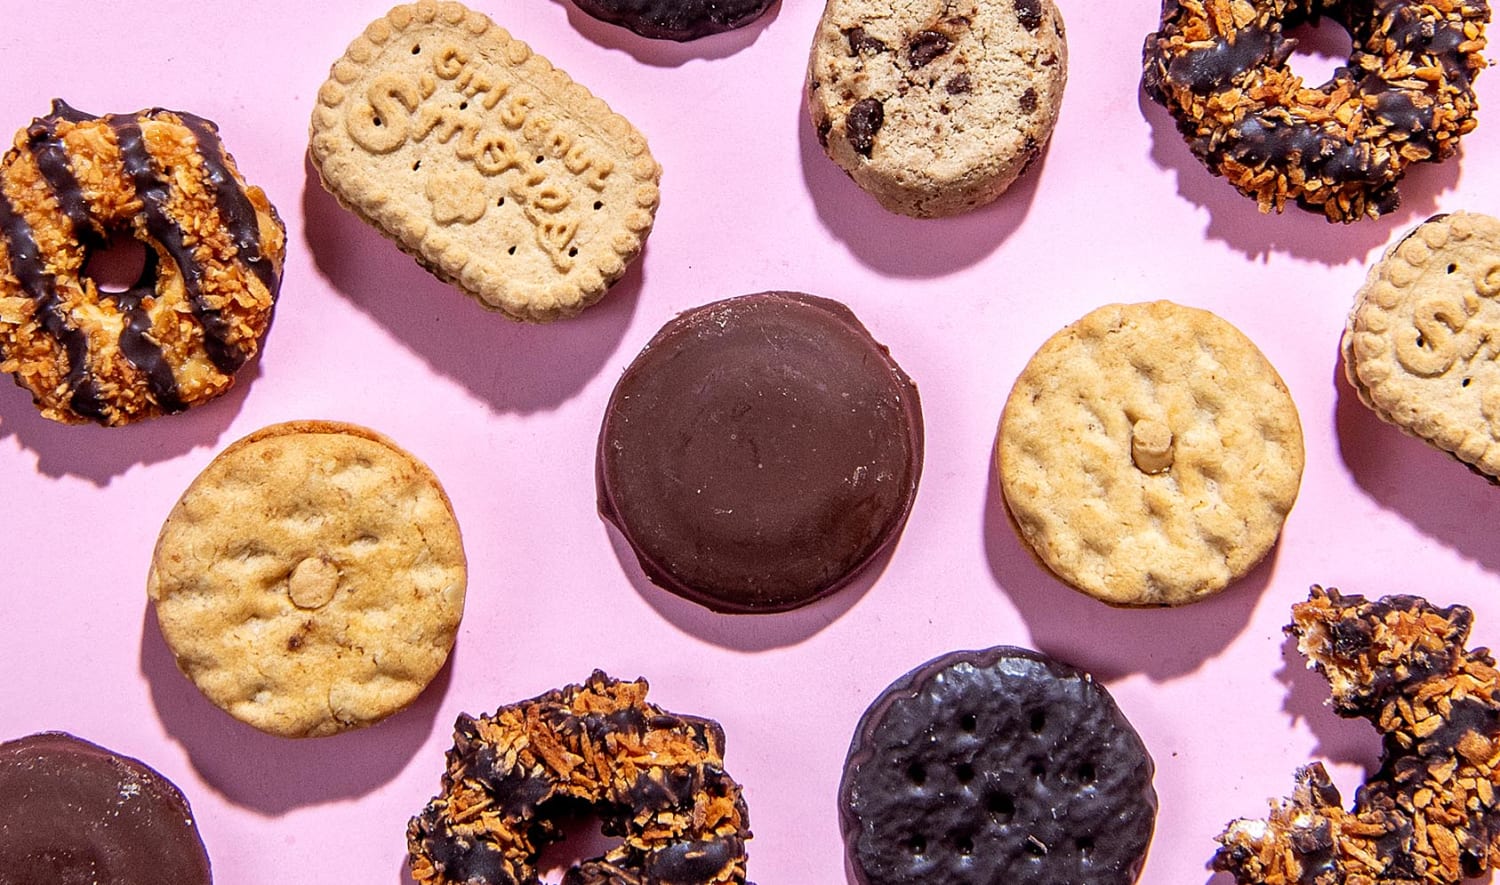 The 7 healthiest Girl Scout cookies, according to dietitians